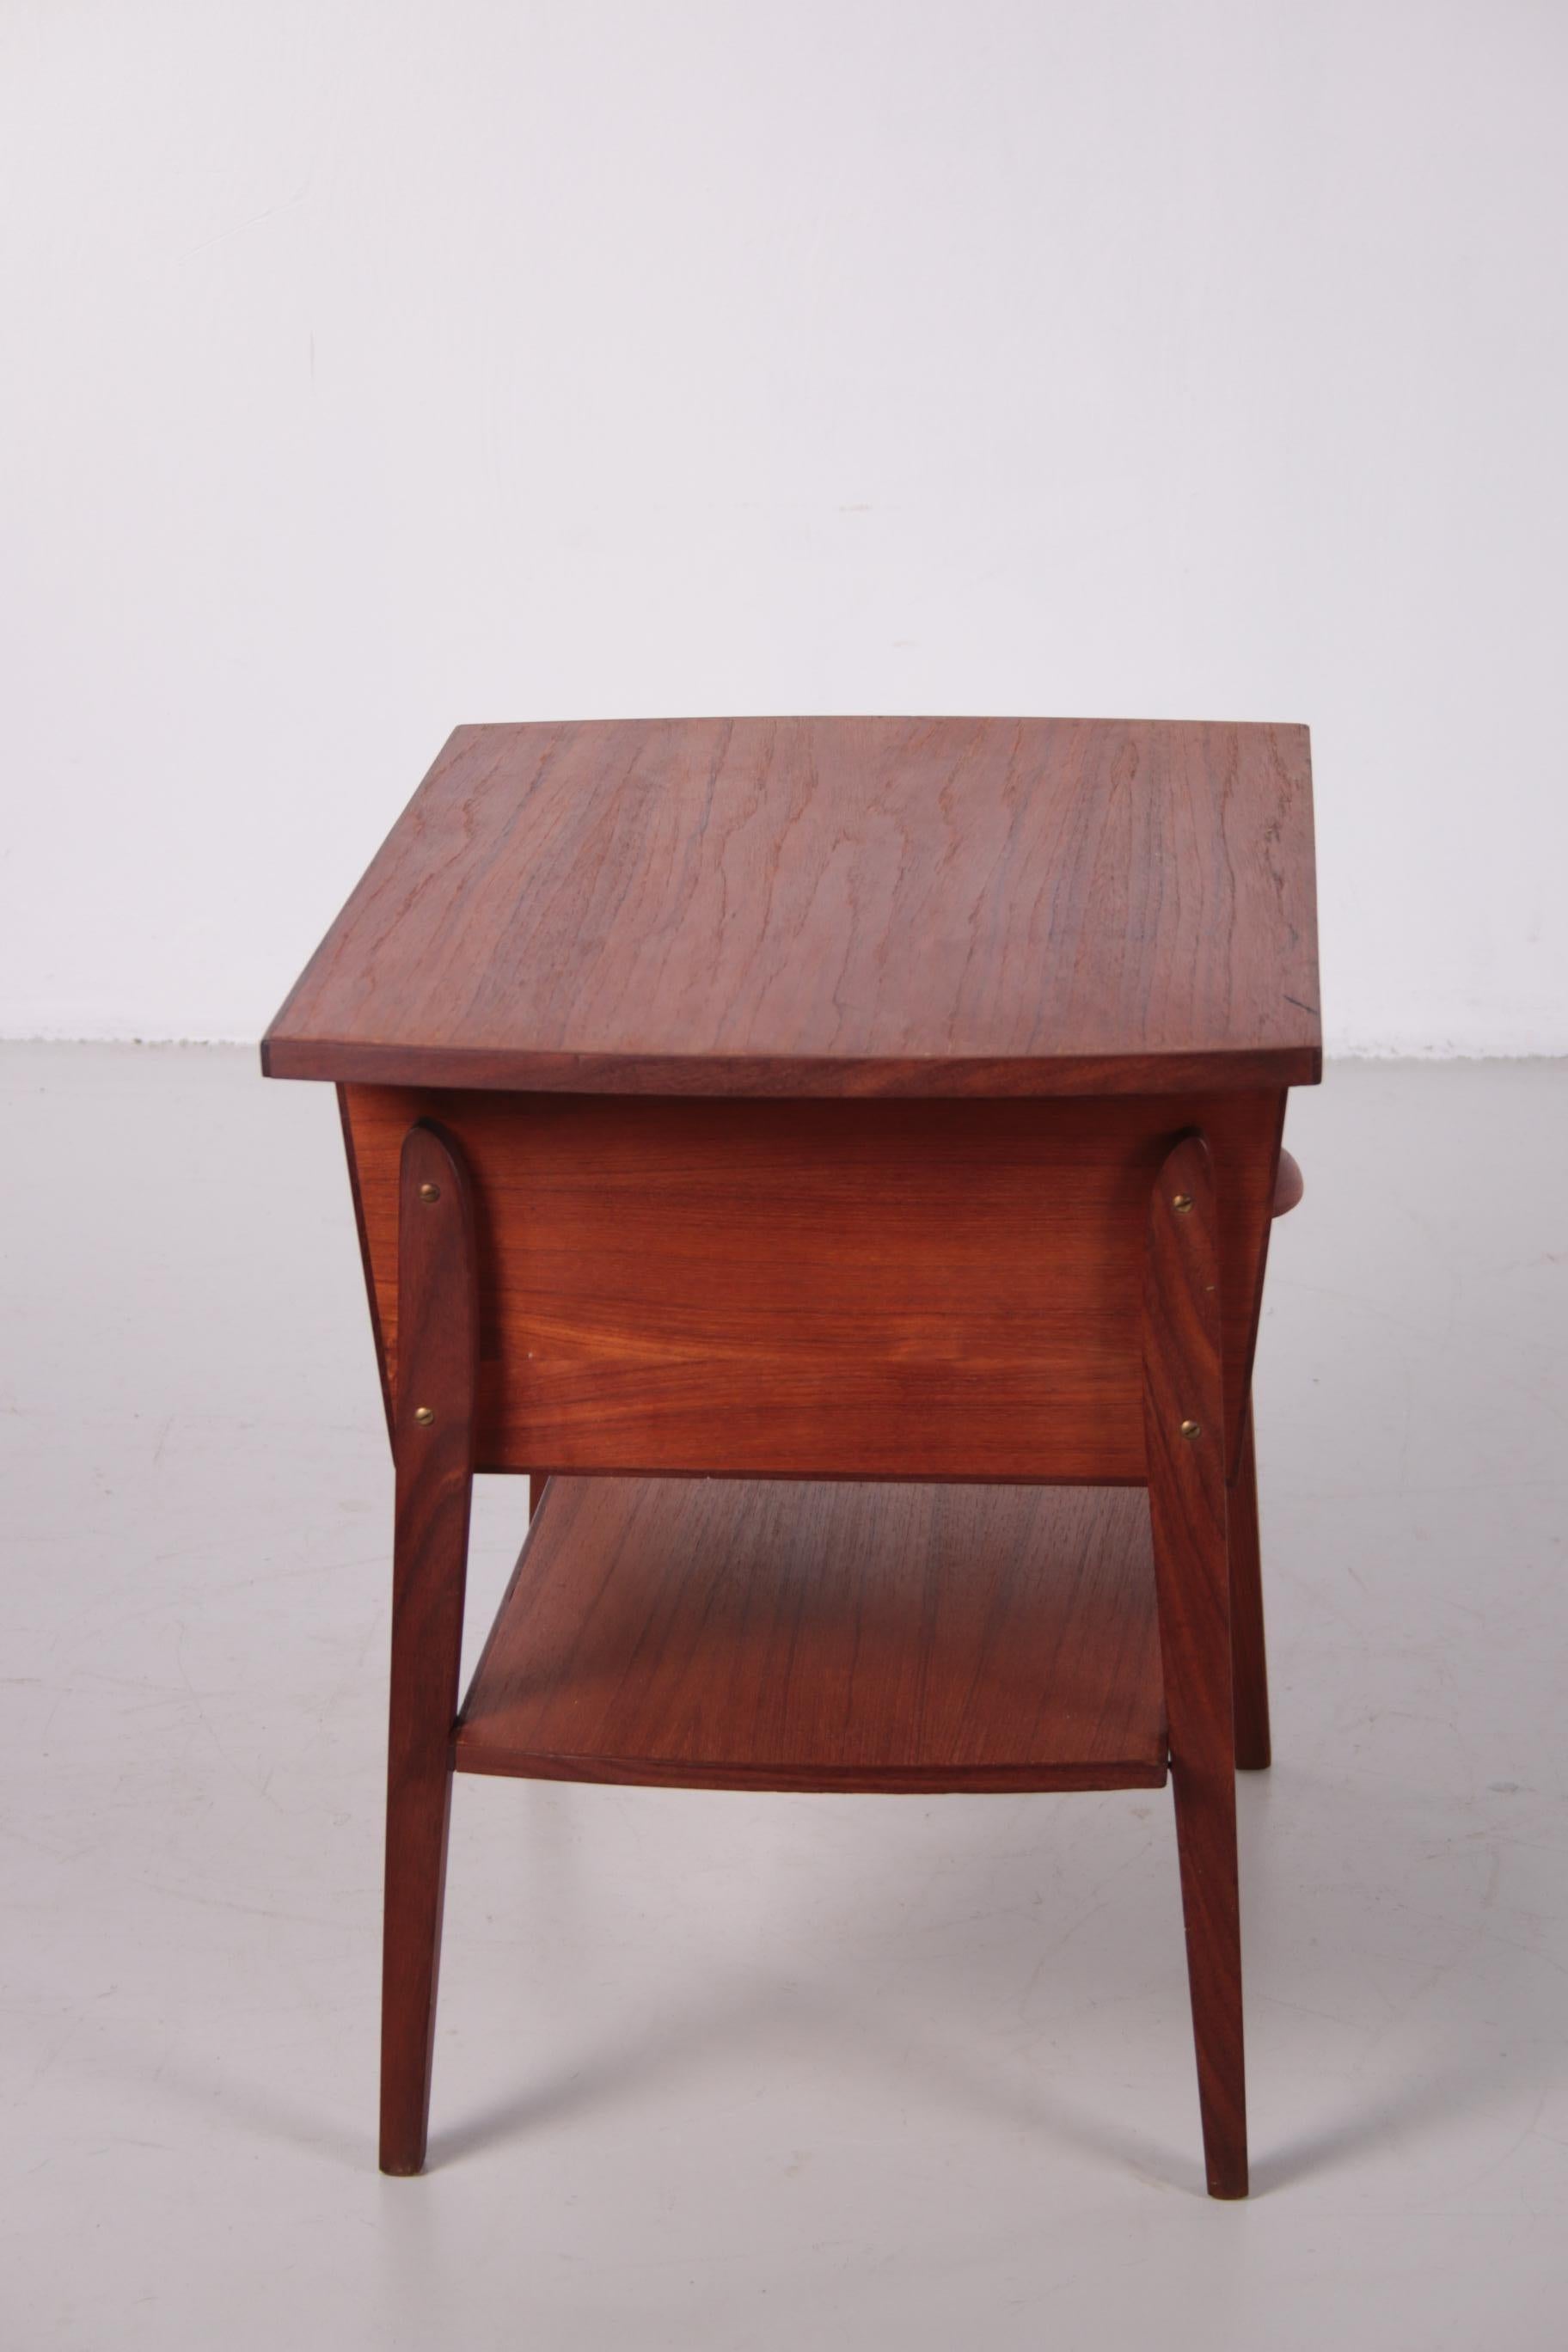 Mid-Century Modern Danish Design Side Table Cabinet Made of Teak with Two Drawers